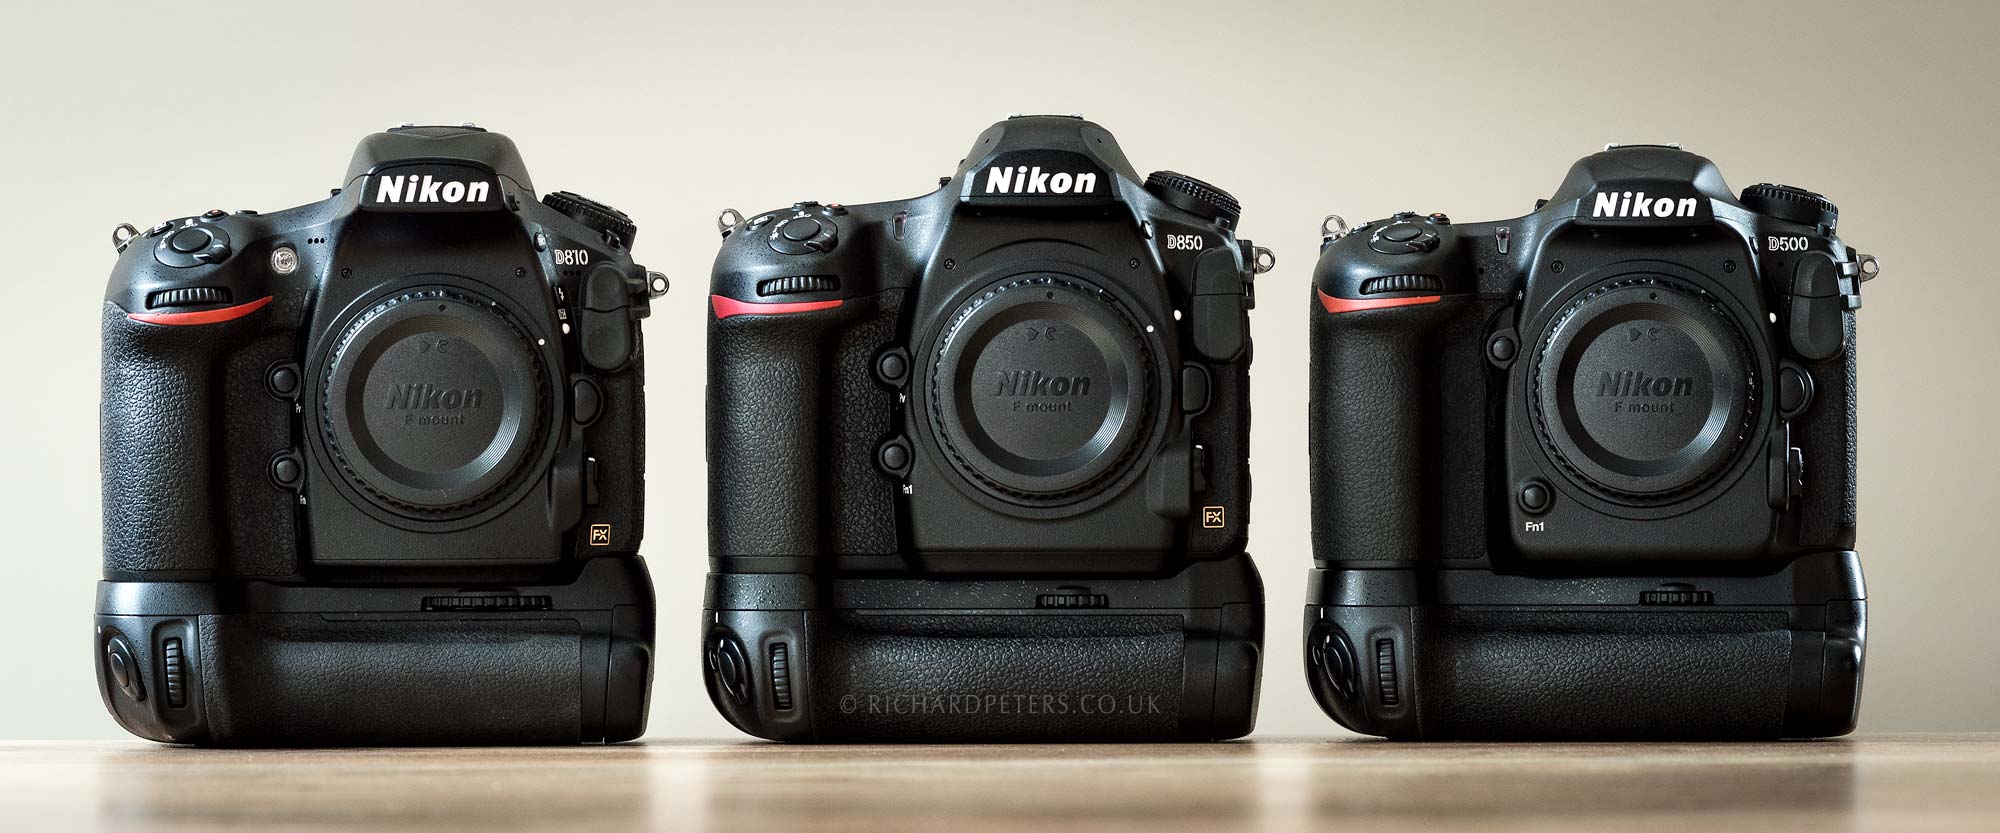 Nikon D850 review. The best wildlife photography camera ever made.